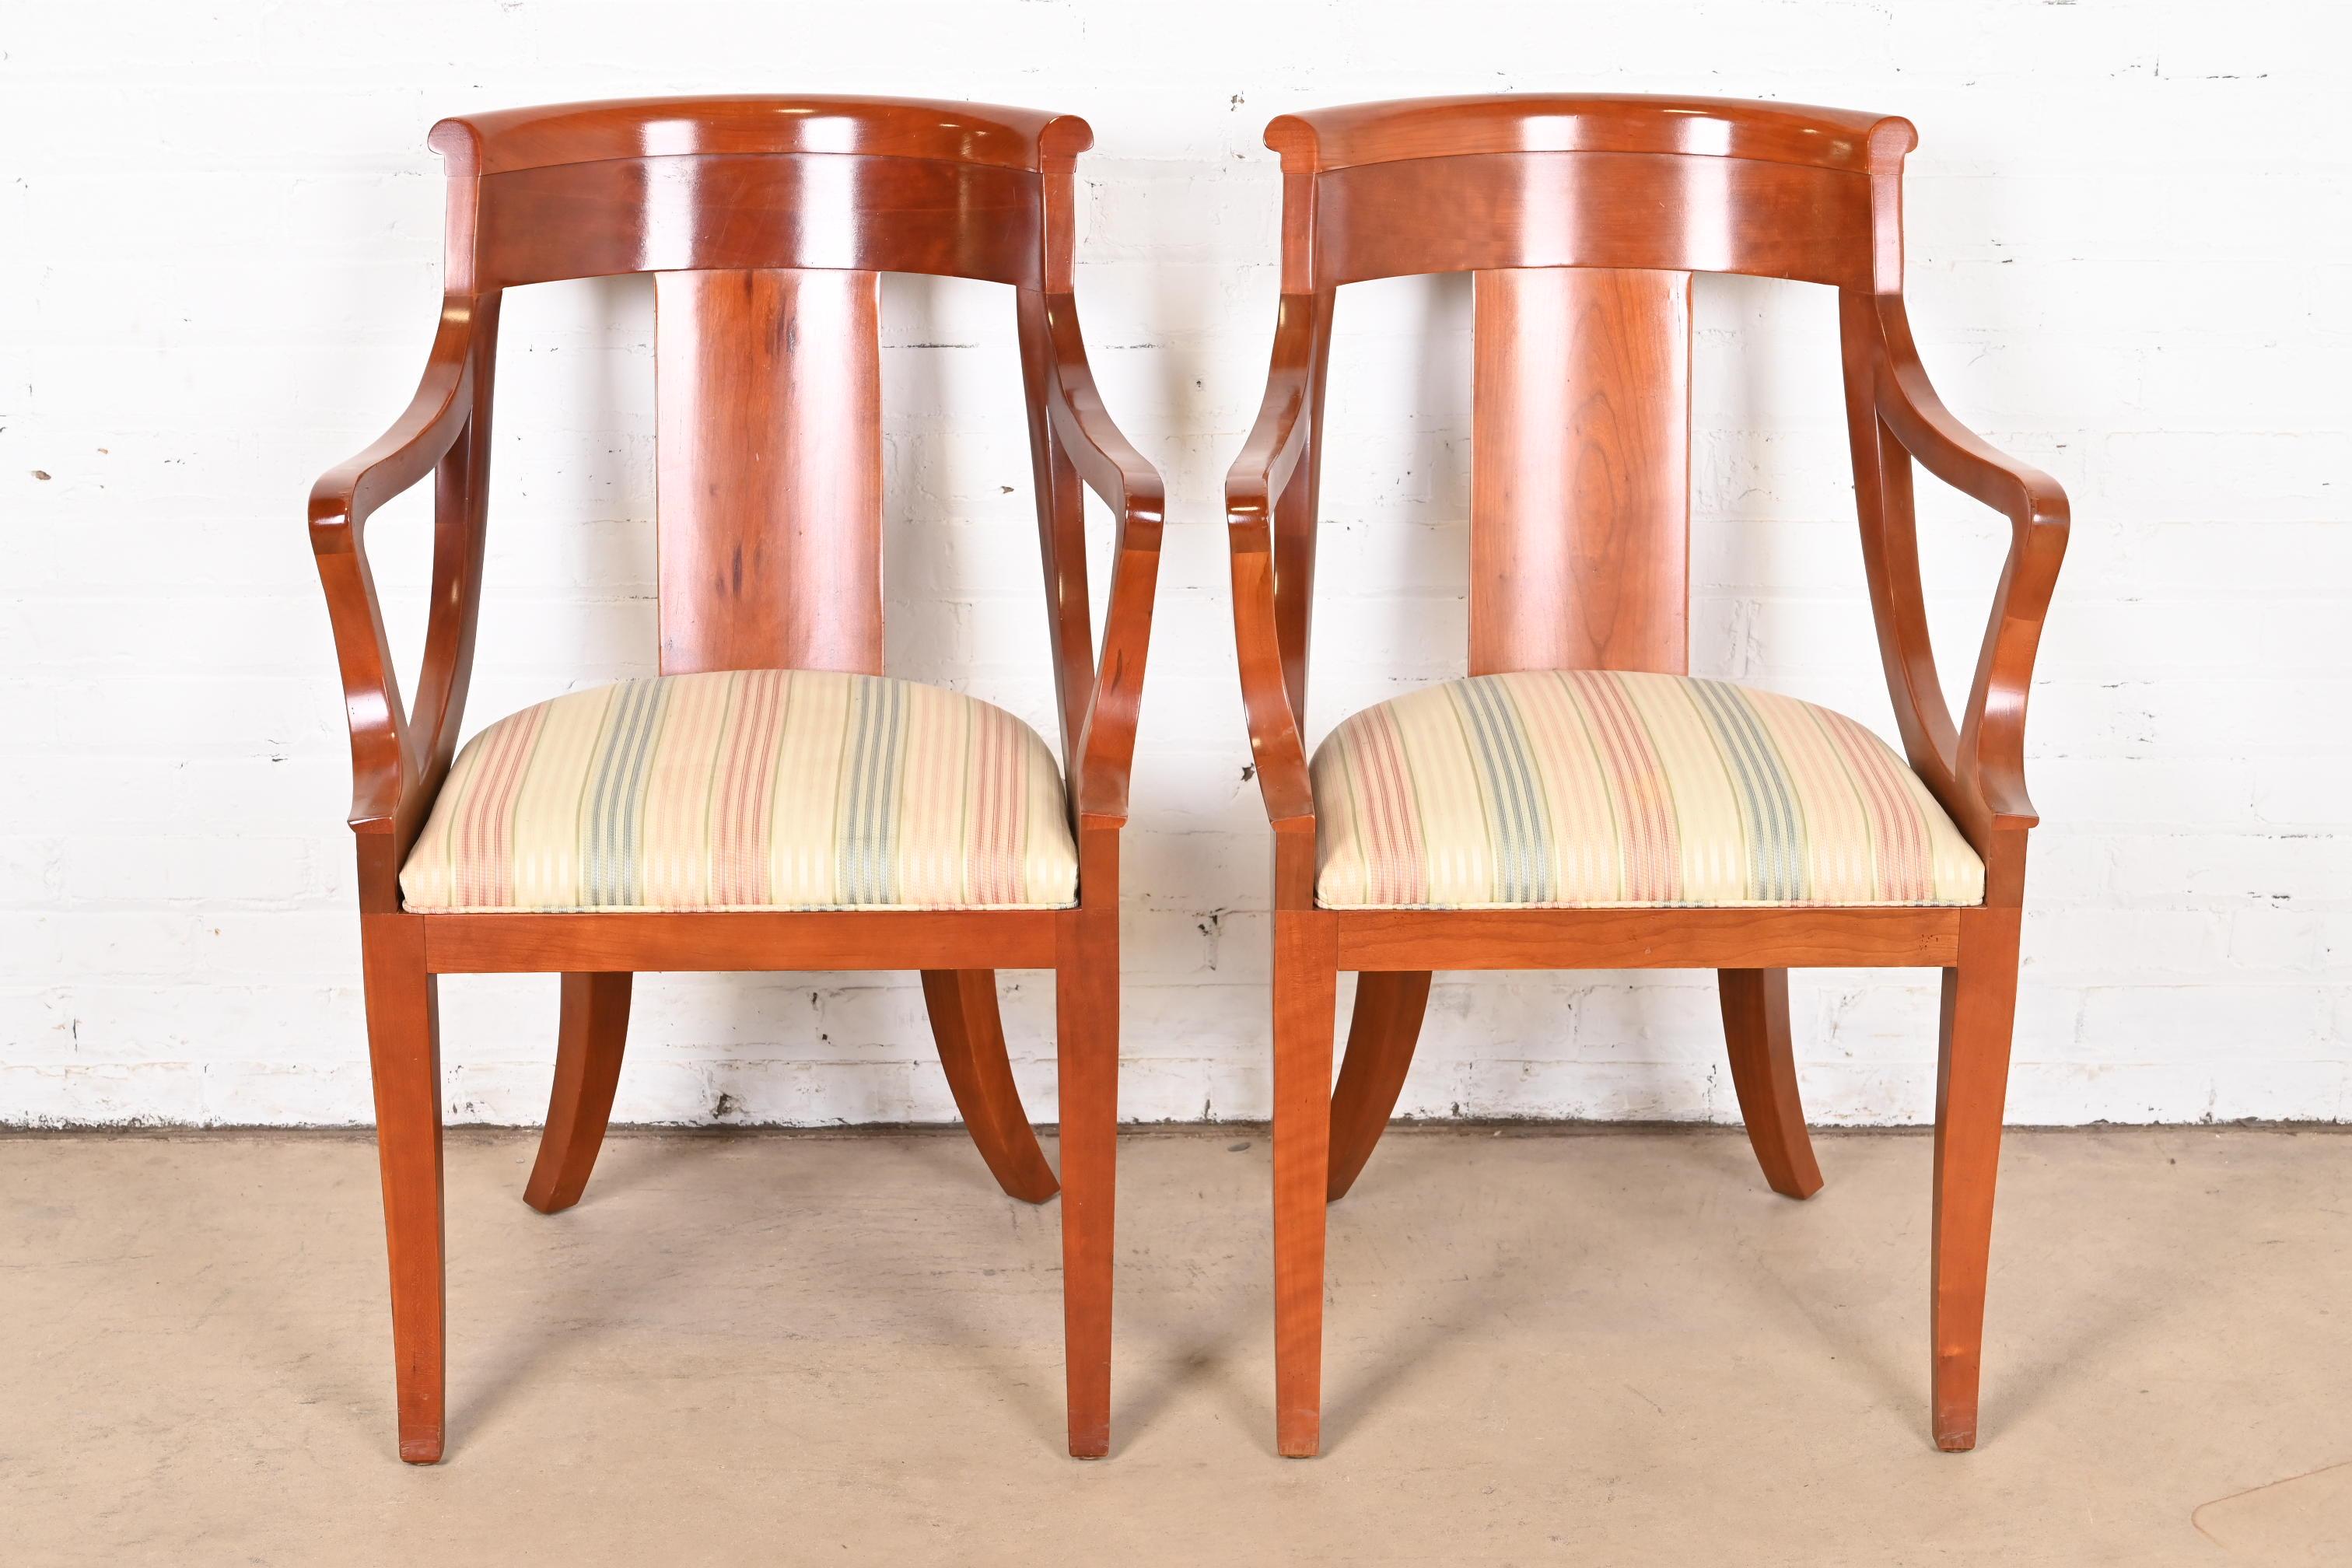 Baker Furniture Solid Cherry Wood Regency Arm Chairs, Pair In Good Condition For Sale In South Bend, IN